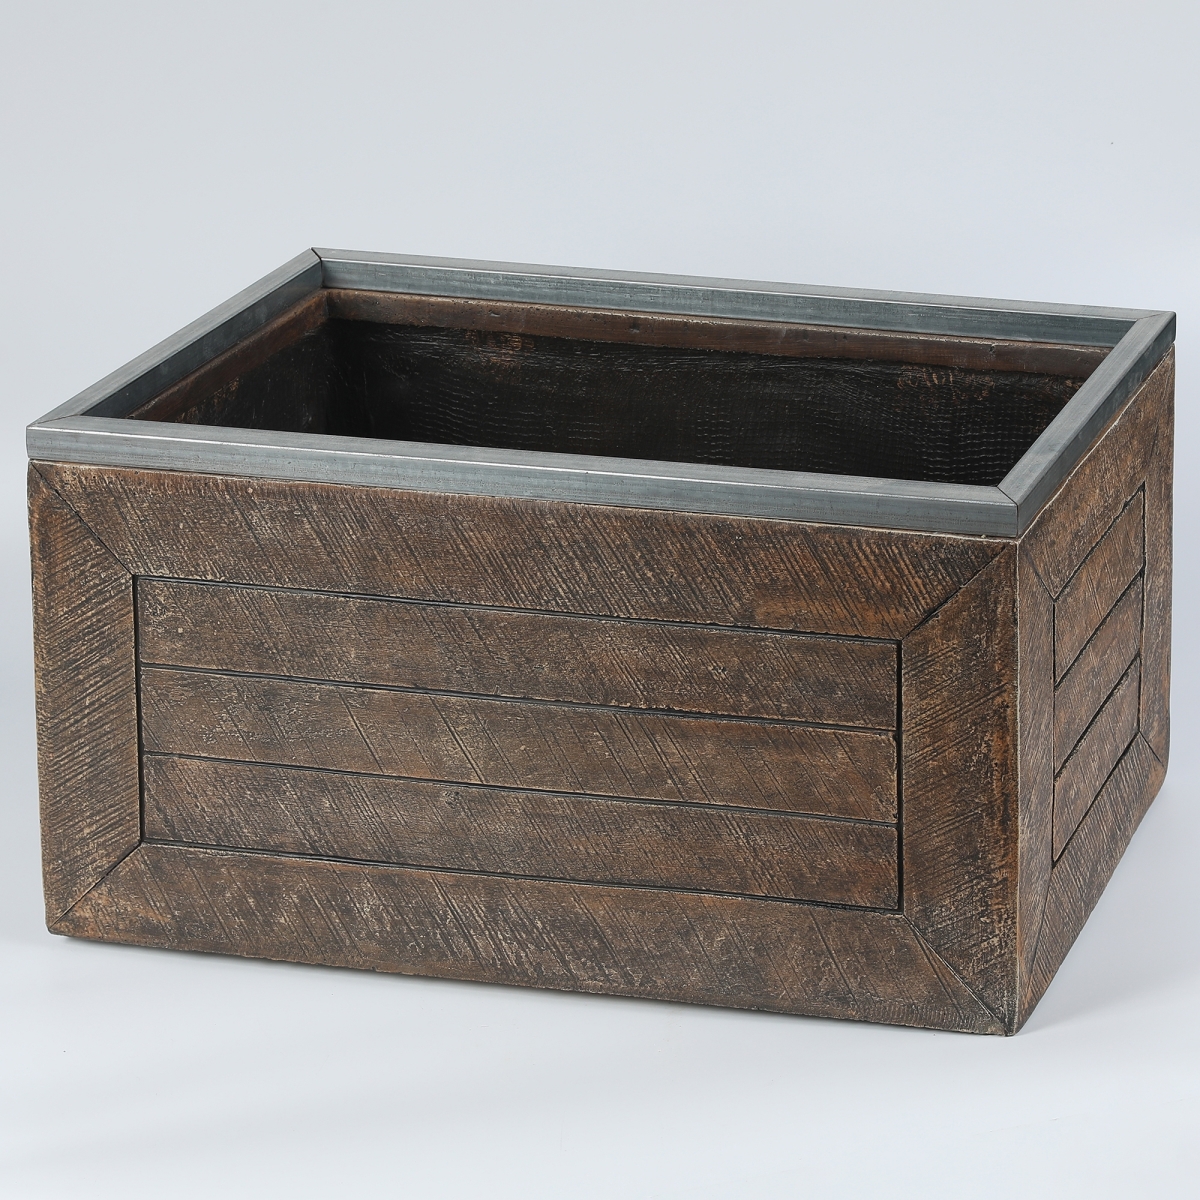 Whpl710 13 X 24 In. Rectangular Mgo Fiberclay Crate Style Planter